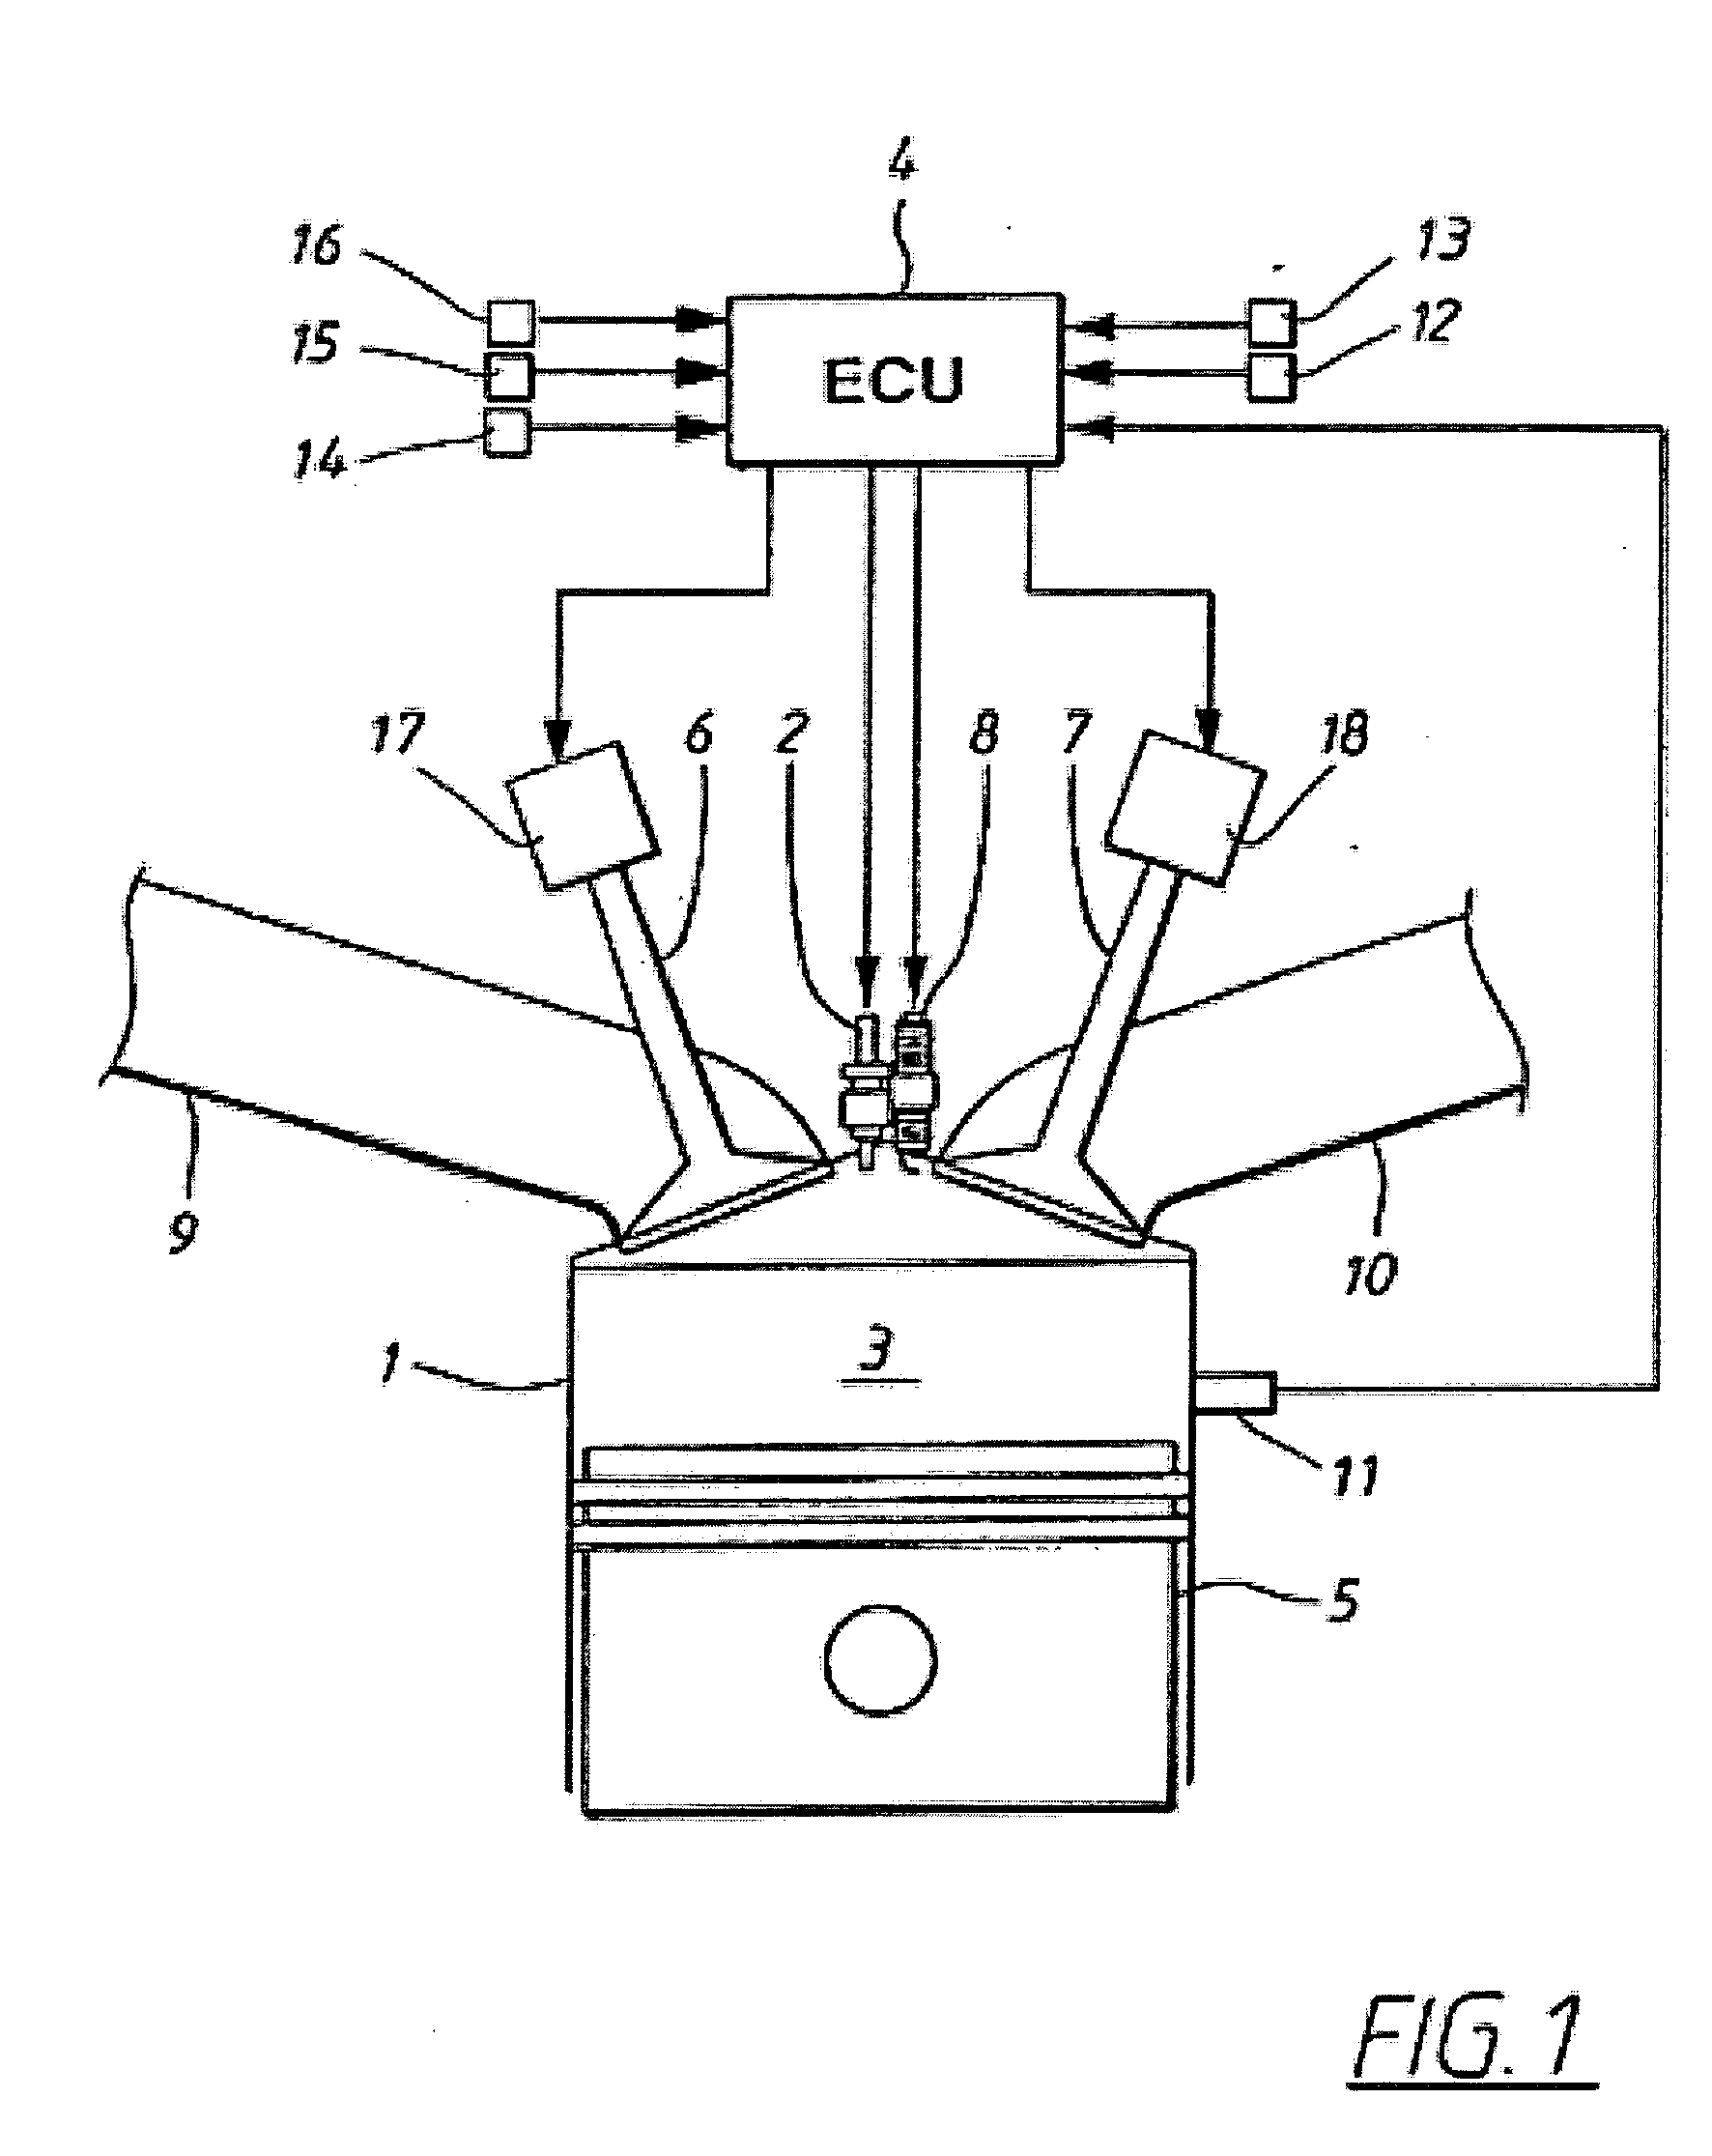 Method for auto-ignition operation and computer readable storage device for use with an internal combustion engine